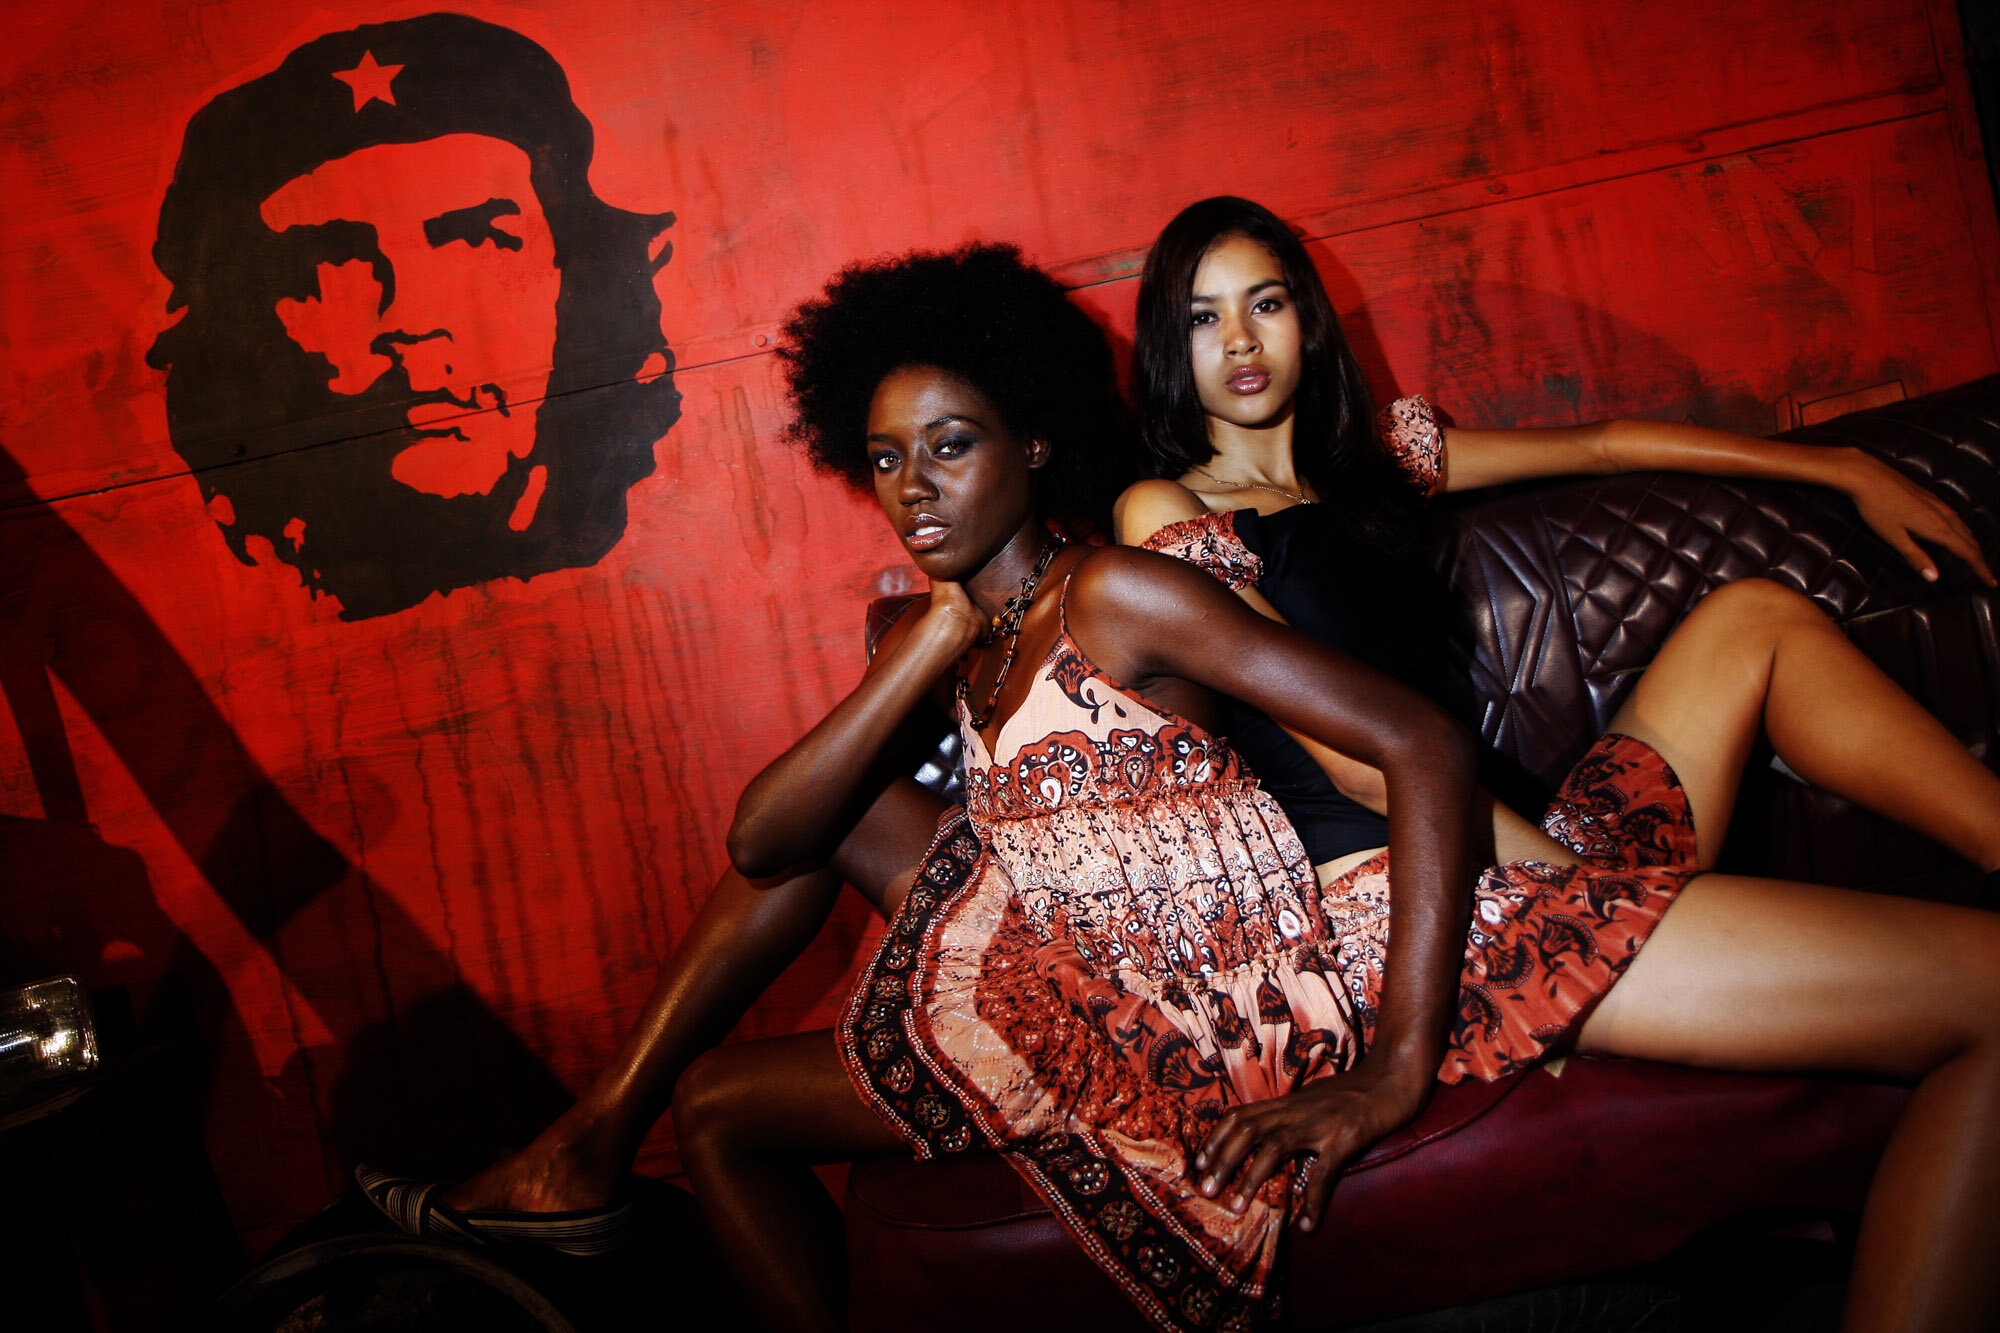  Cuban models of the KINGS OF SALSA, a show by british theater producer Jon Lee, pose during a photoshoot in a garage against the backdrop of the Che Guevara image, 2007. 